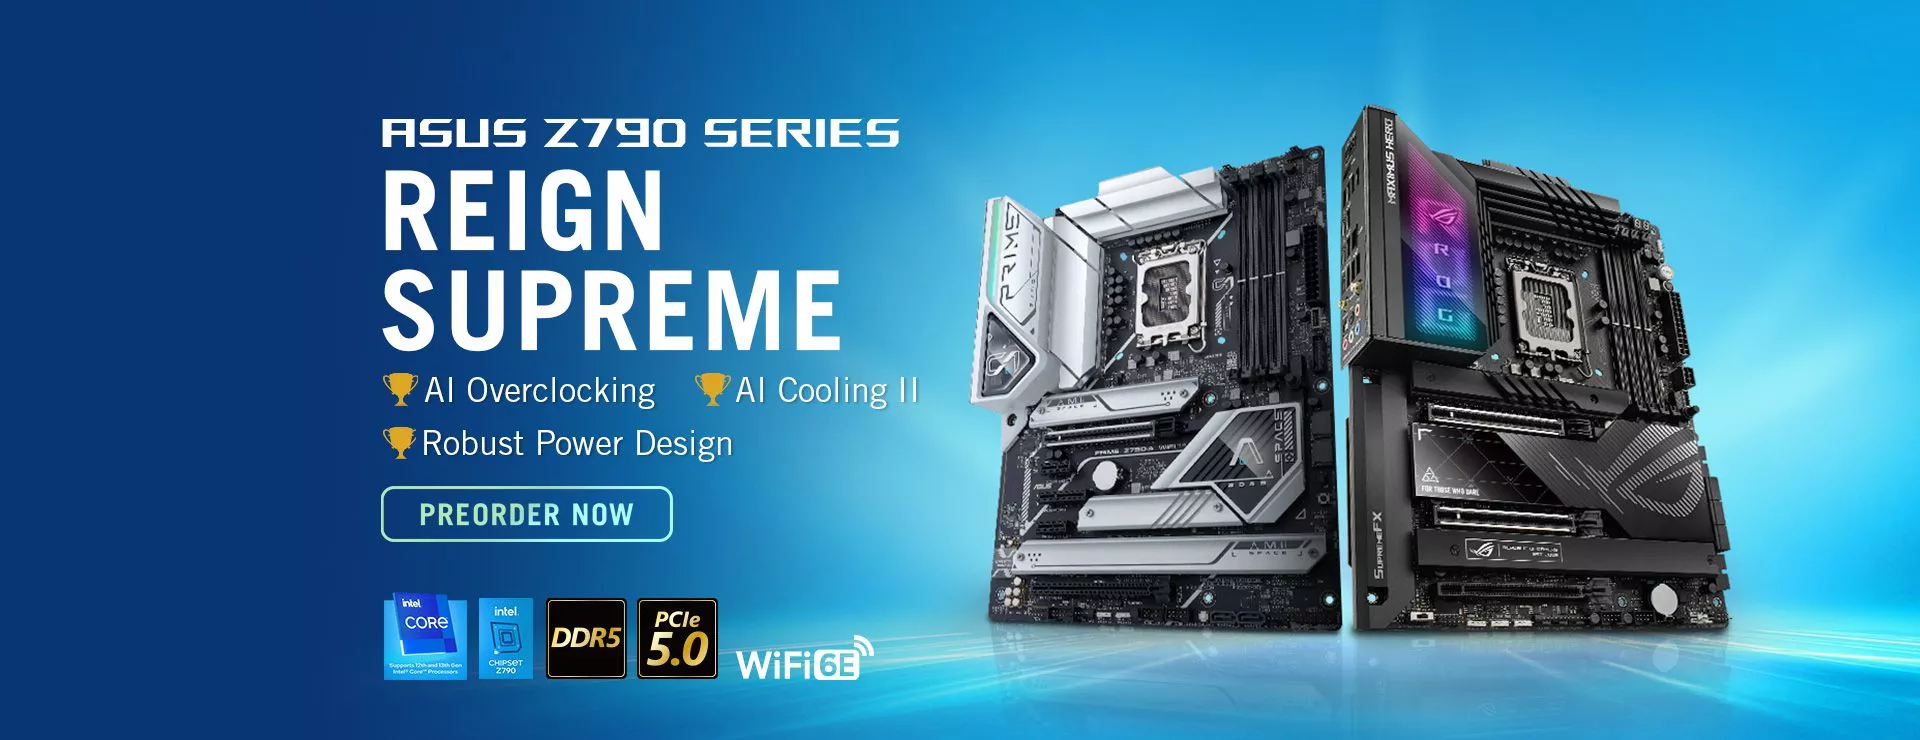 ASUS Z790 Series Reign Supreme AI Overclocking AI Cooling II Robust Power Design Preorder Now